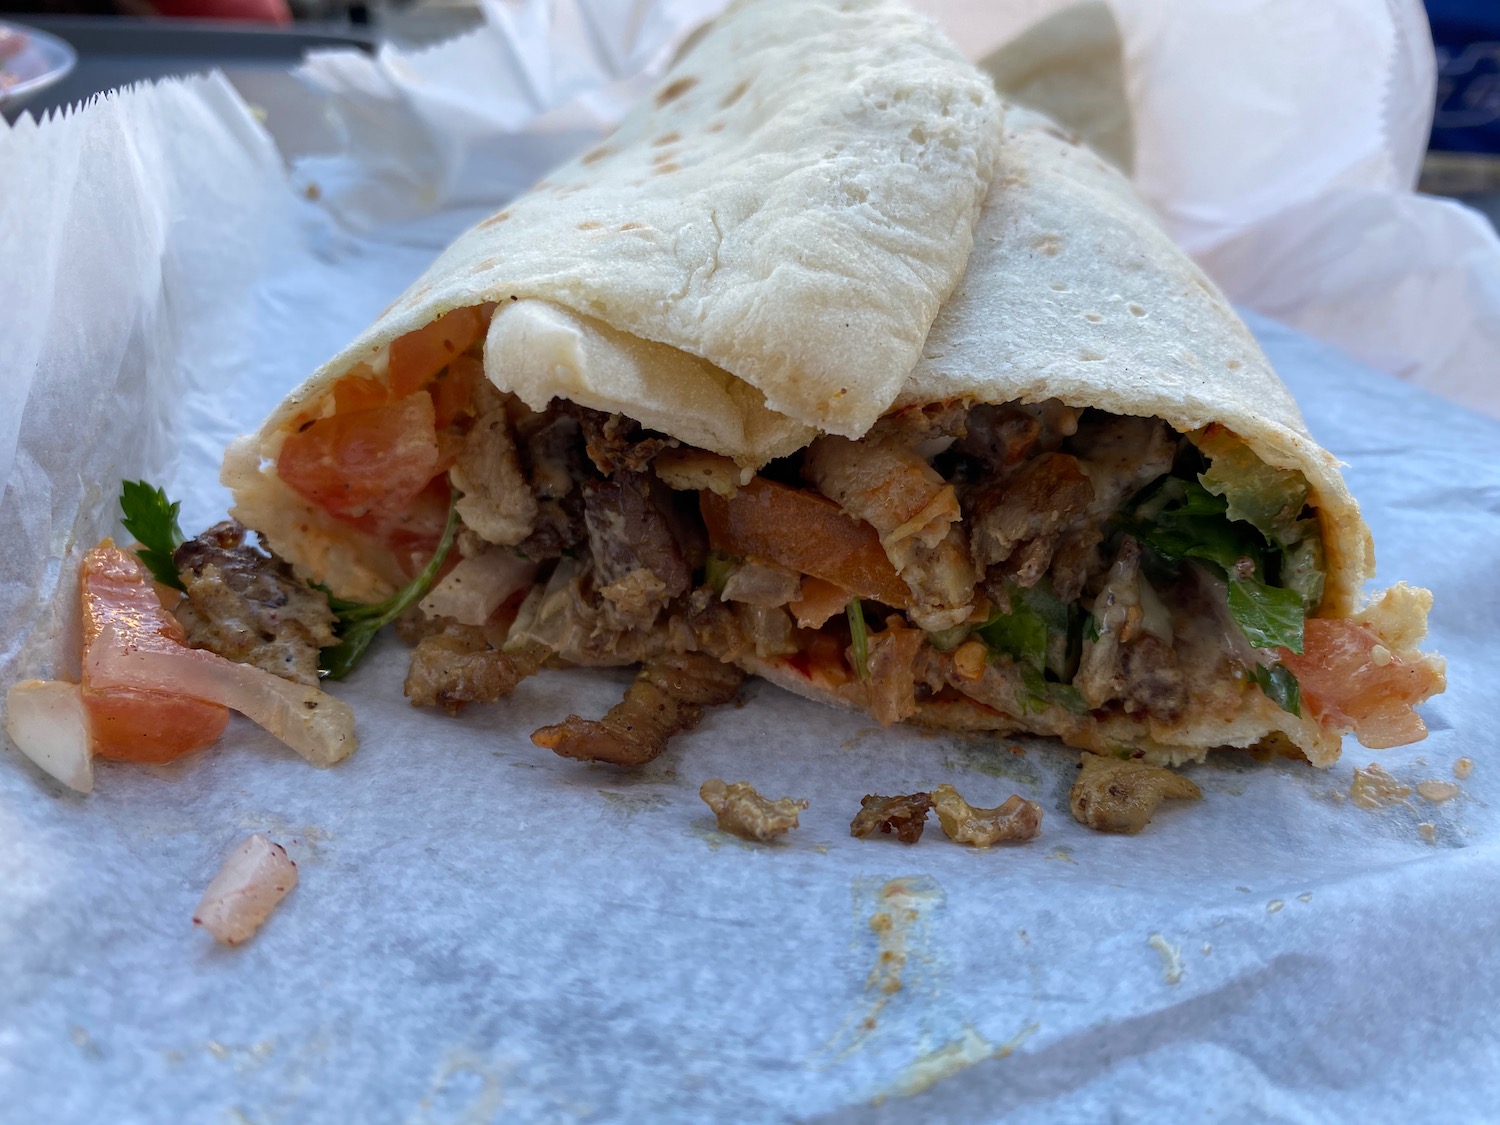 a burrito with meat and vegetables on a white paper